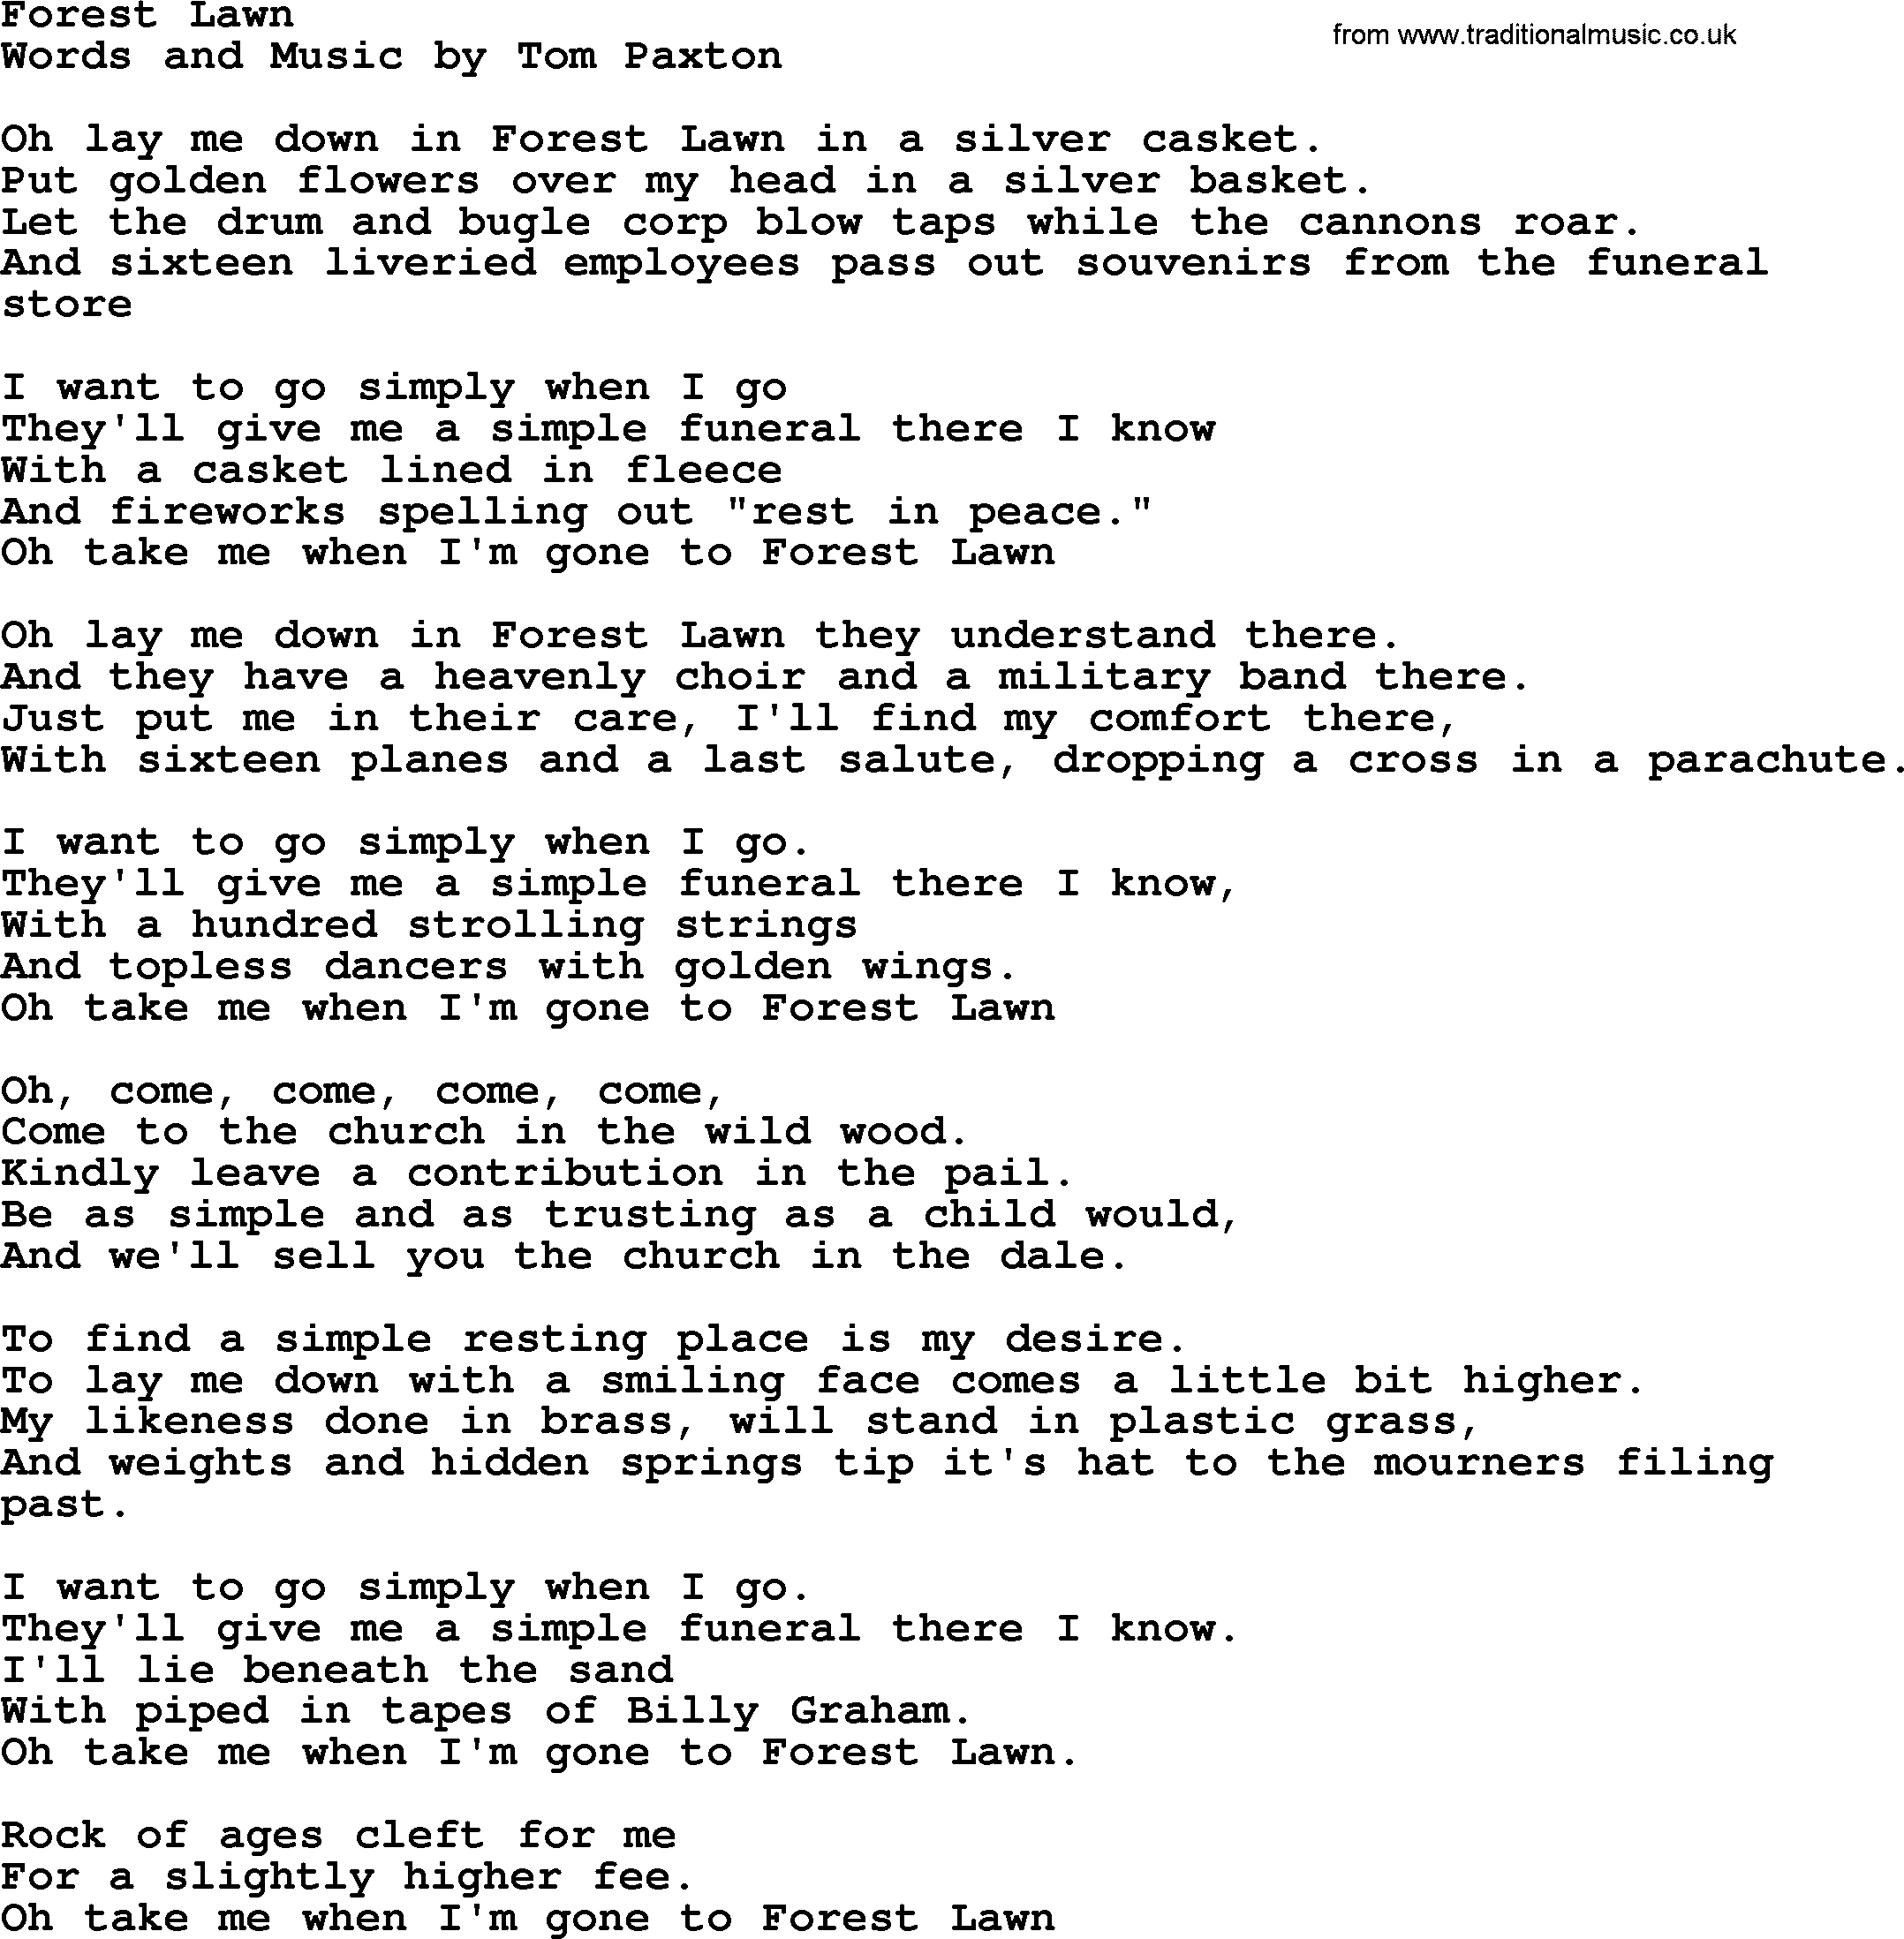 Tom Paxton song: Forest Lawn, lyrics